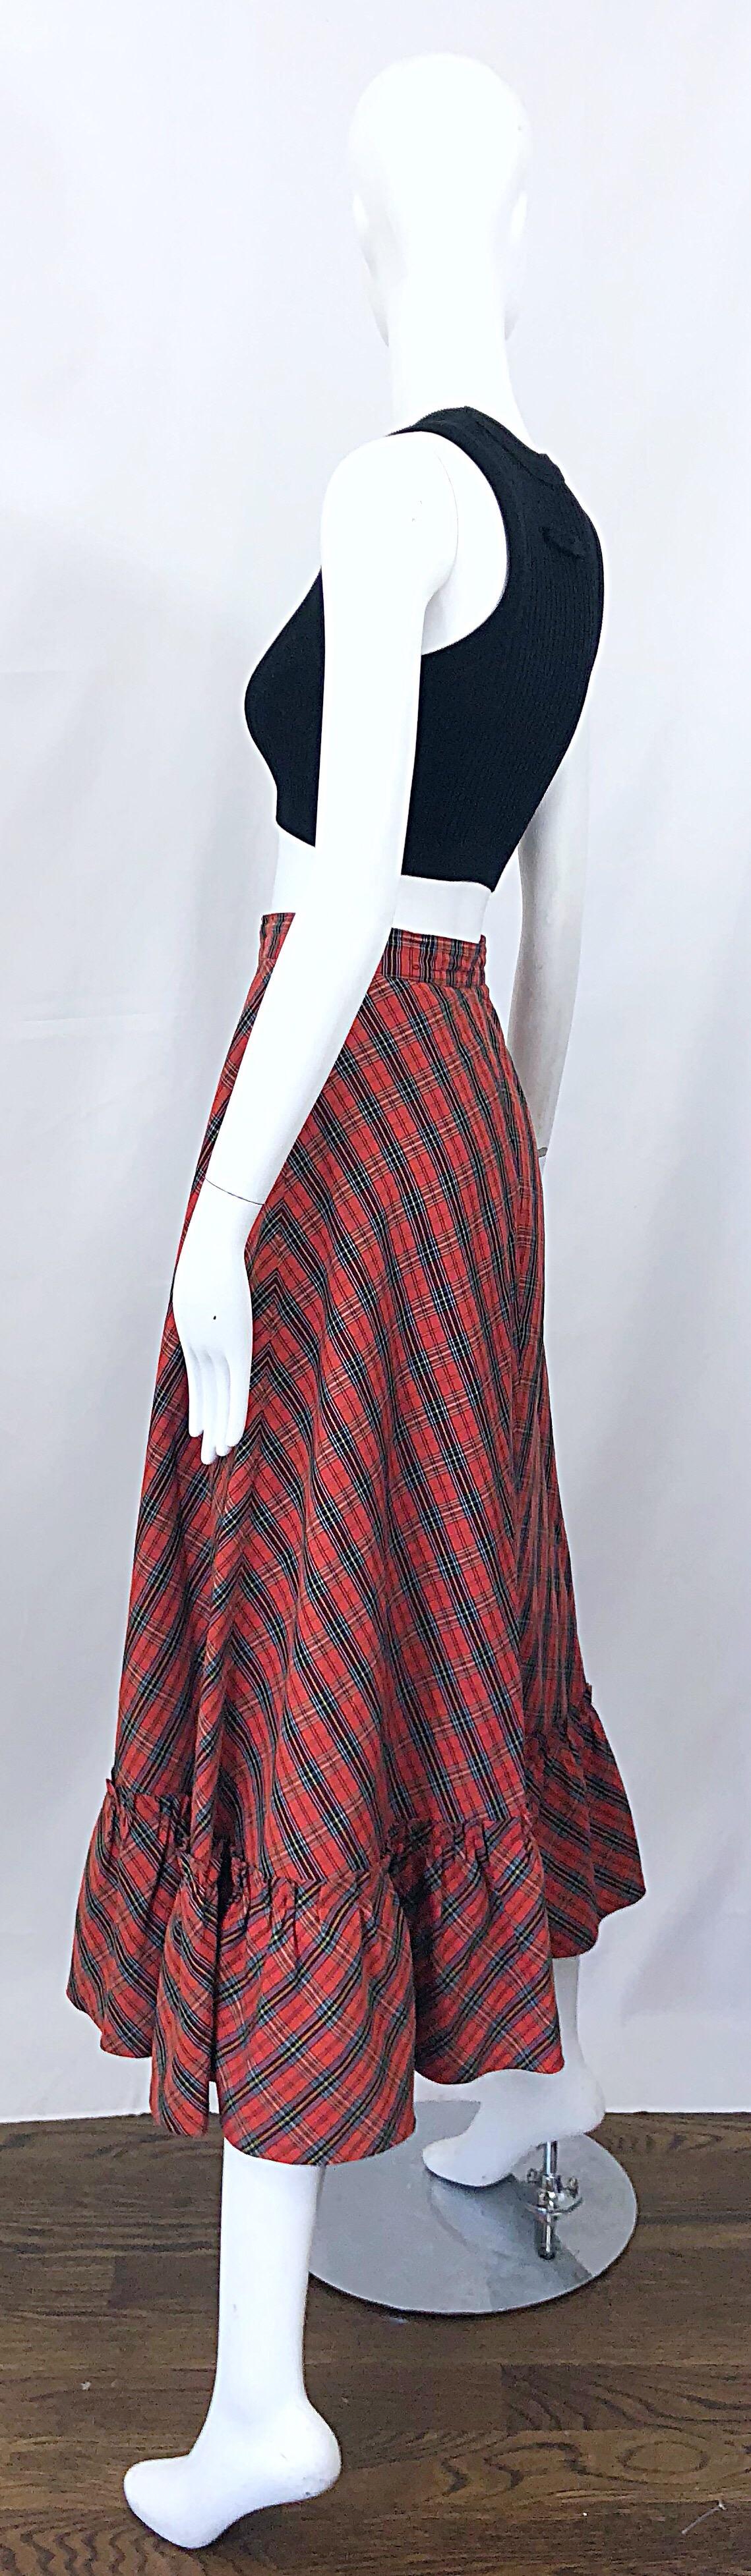 1970s Red Plaid Cotton Voile Ruffled Hem Vintage 70s Maxi Skirt For Sale 4